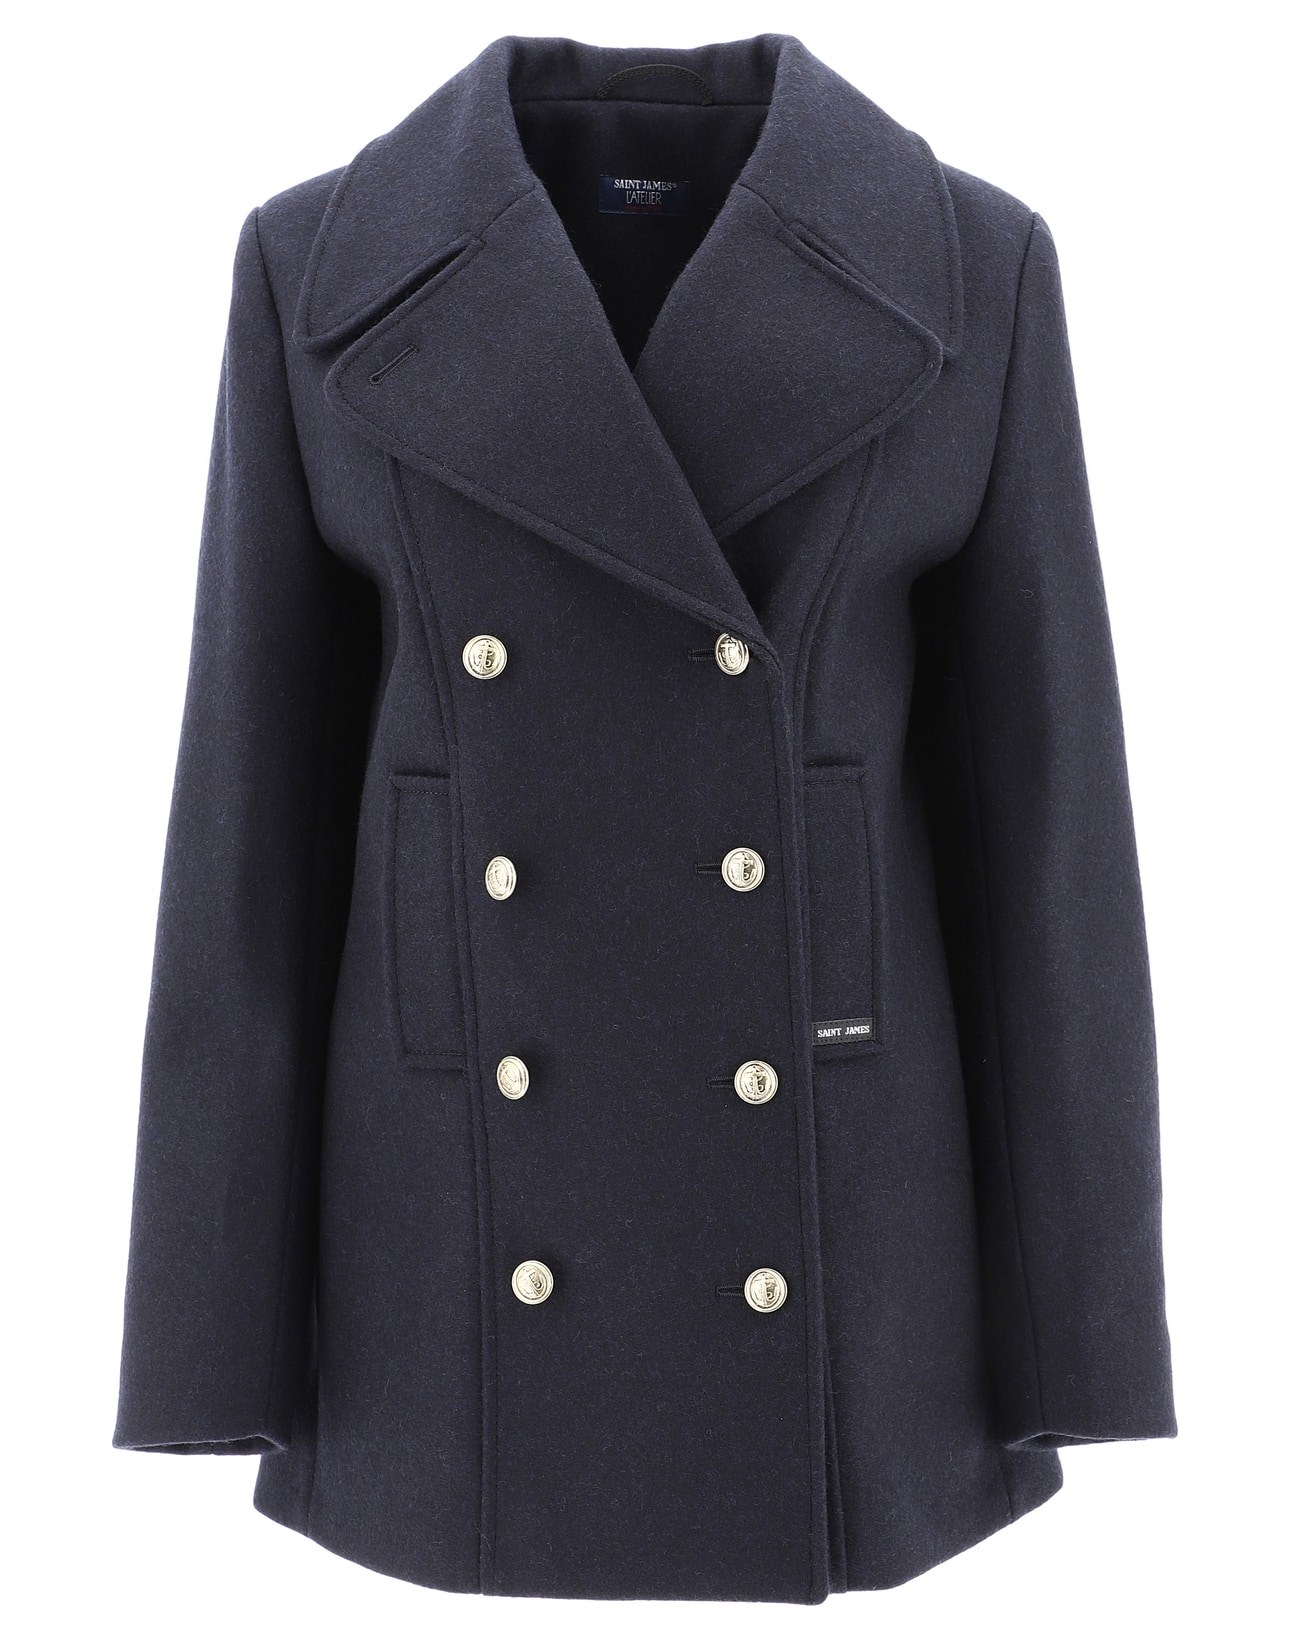 【Saint James】Double-breasted wool coat